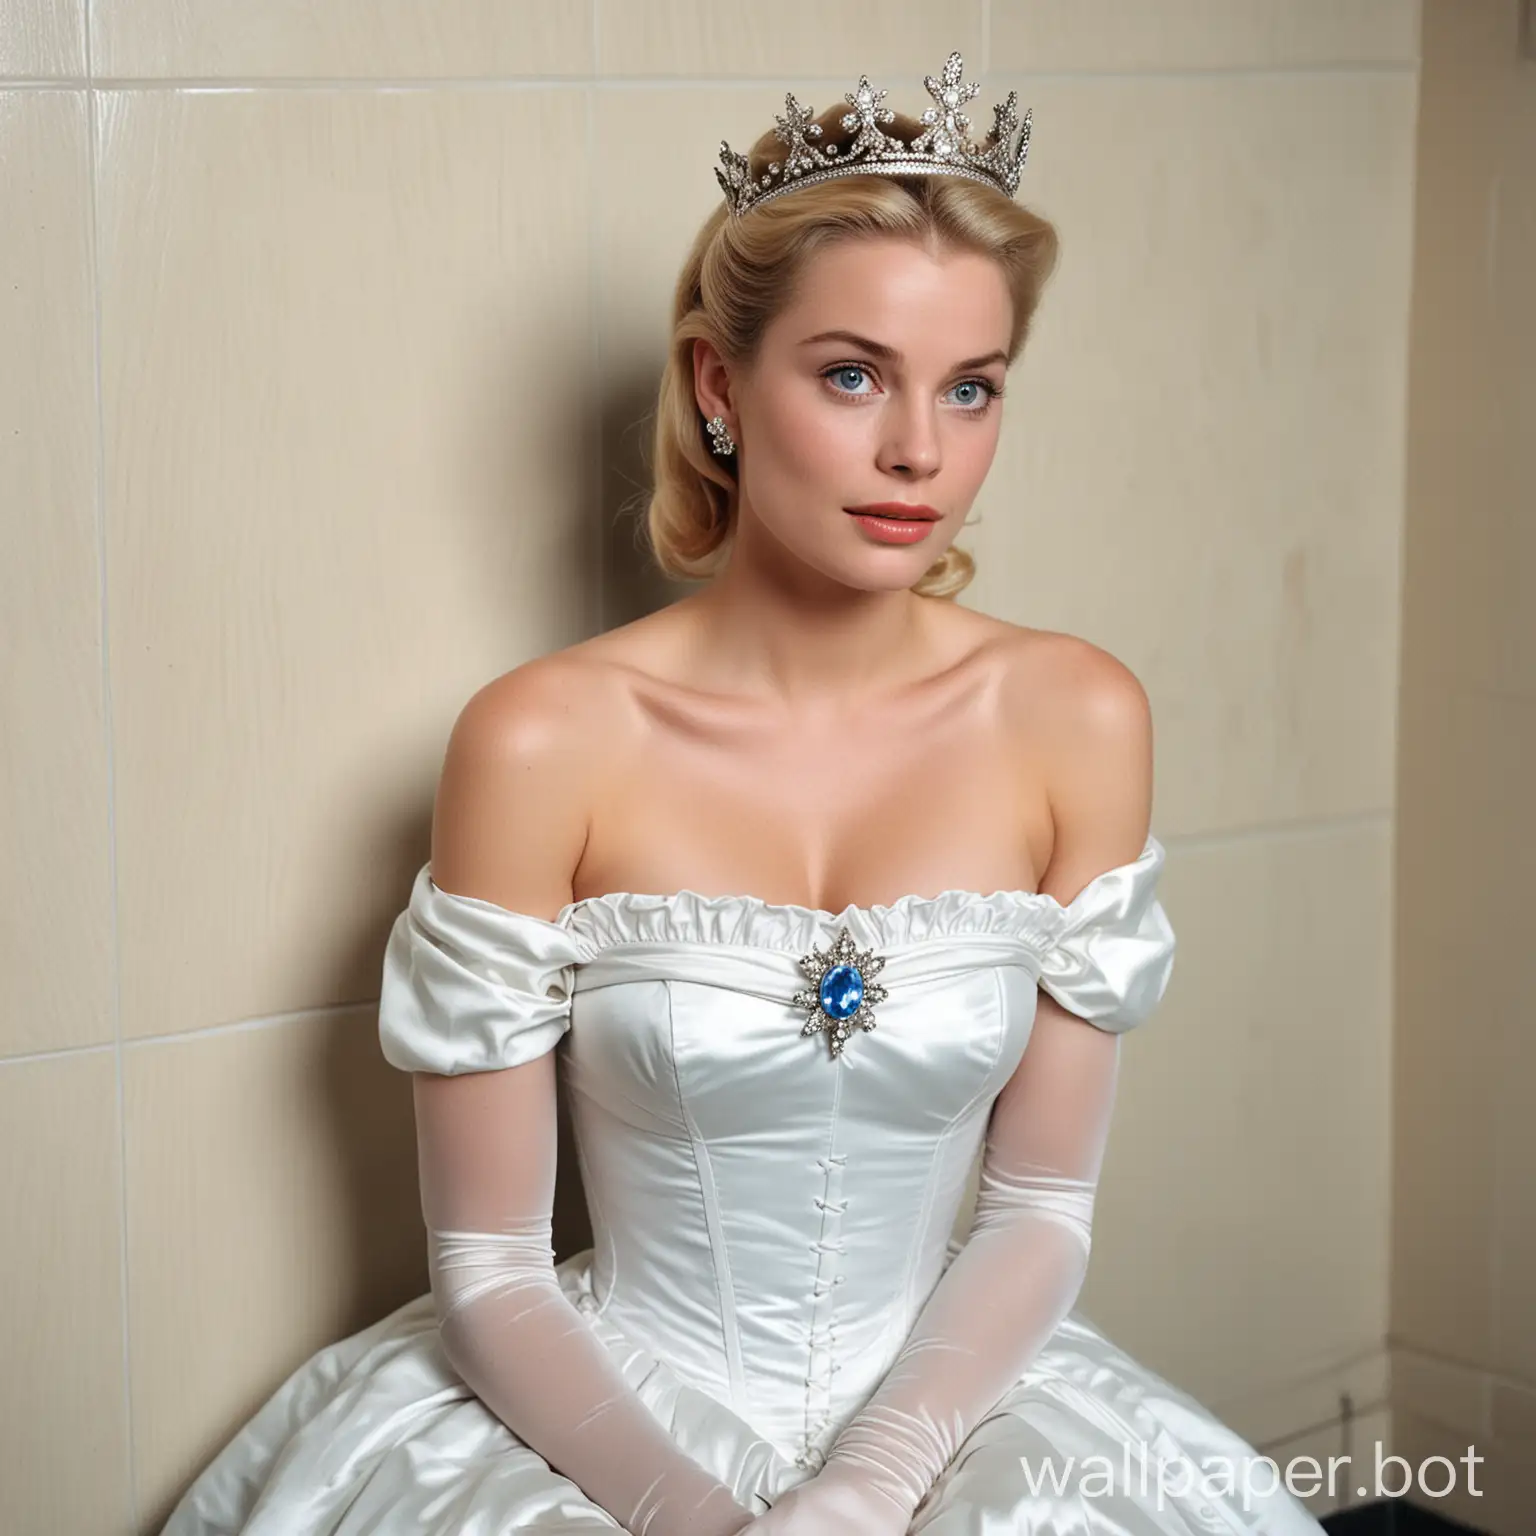 In men's public toilet, a white, young actress with blue eyes and blonde hair, Grace Kelly, with a crown on her knees in a white silk off-shoulder sleeveless dress, white silk push-up corset, and white silk opera length gloves, has an expression of disgust on her face. The white Queen Grace Kelly, with a crown, begs on her knees in front of two black male homeless men with their pants down. The queen's mouth is open extra wide. View from above.